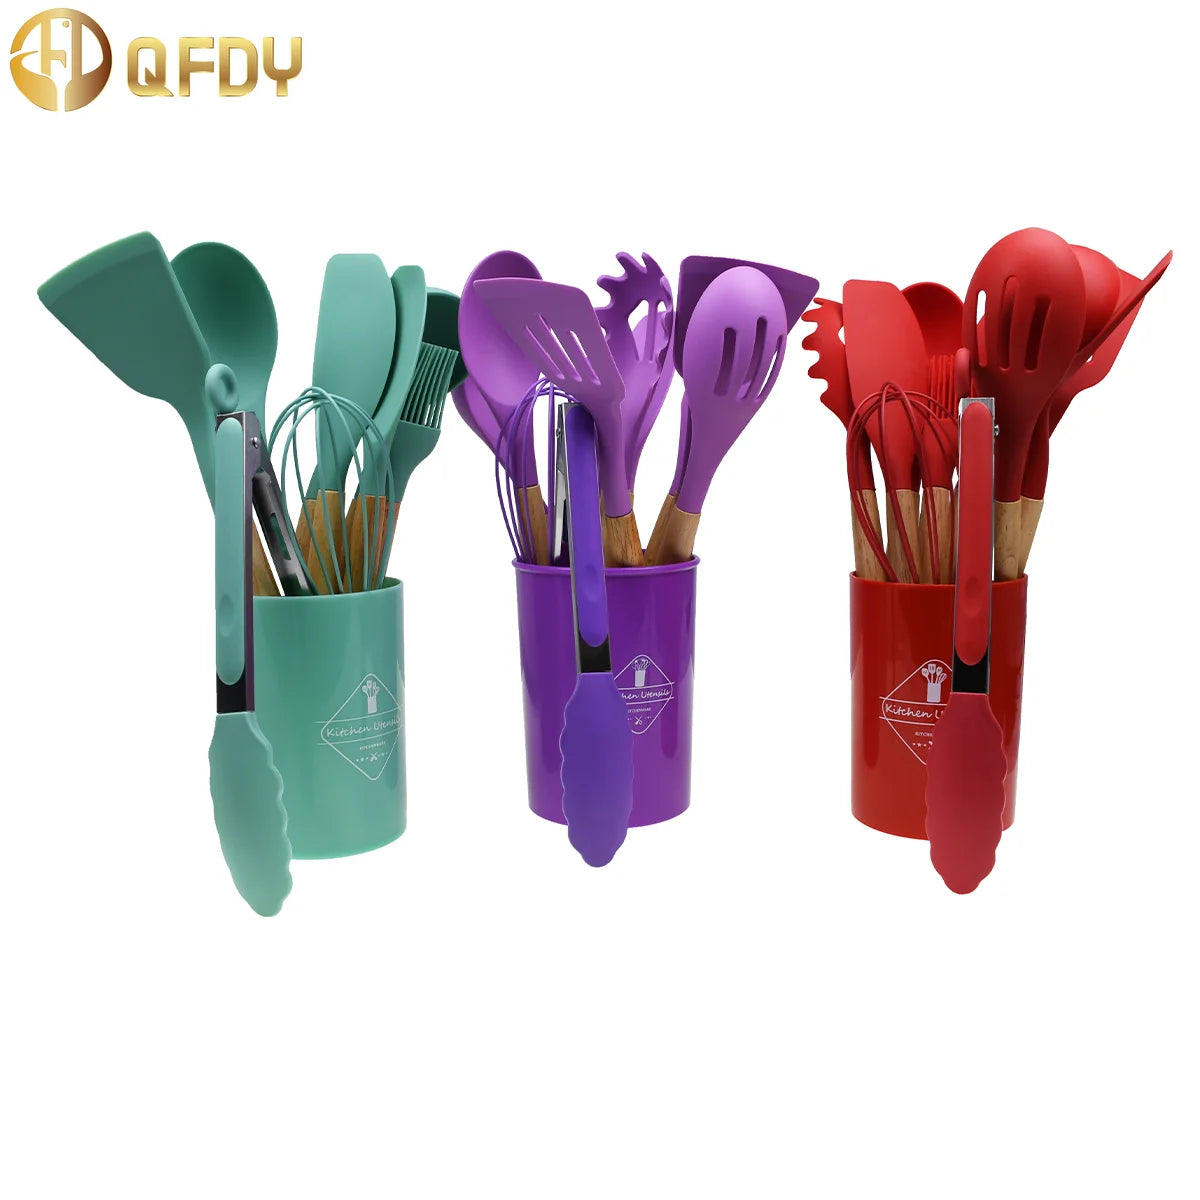 12 pieces Silicone Kitchenware Set with Wooden Handles: Includes Non-Stick Pans, Cooking Tools.